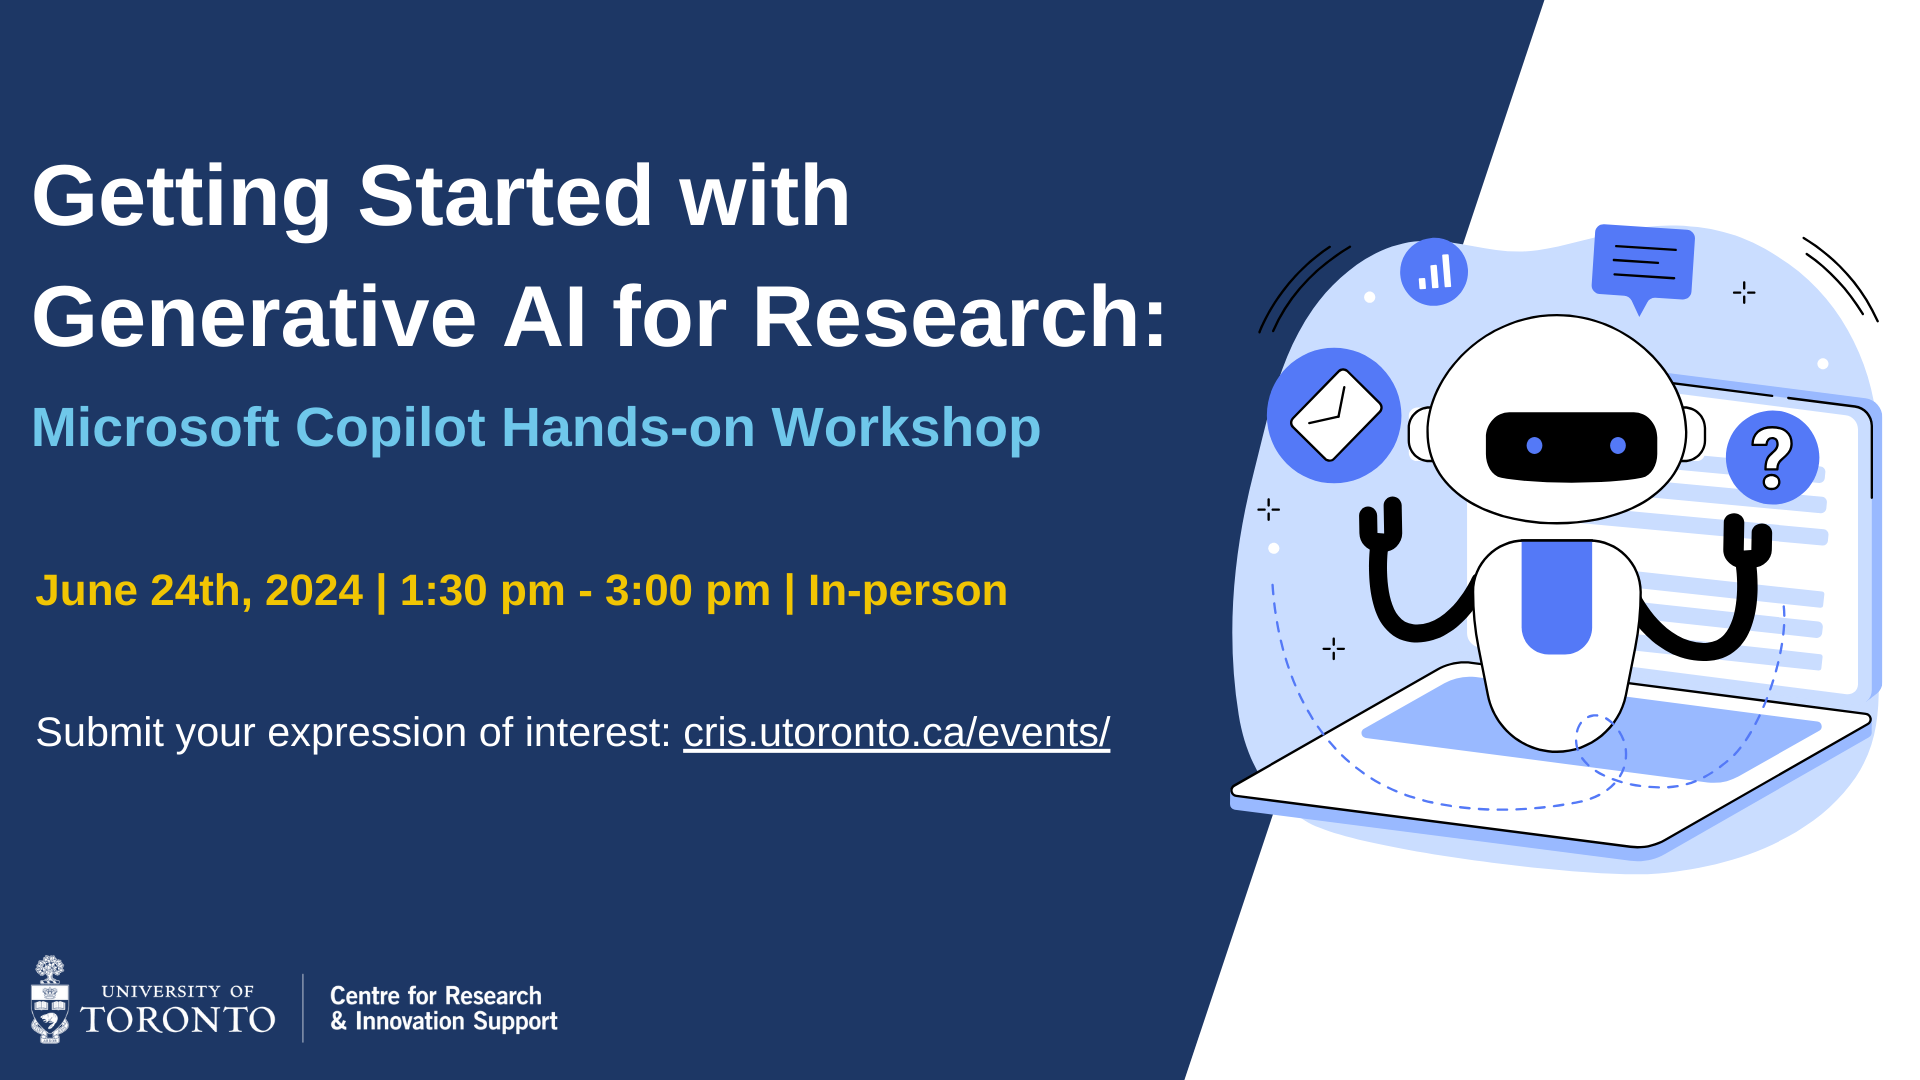 poster for Getting Started with Generative AI for Research workshop on June 24th, 1:30 – 3:00 pm